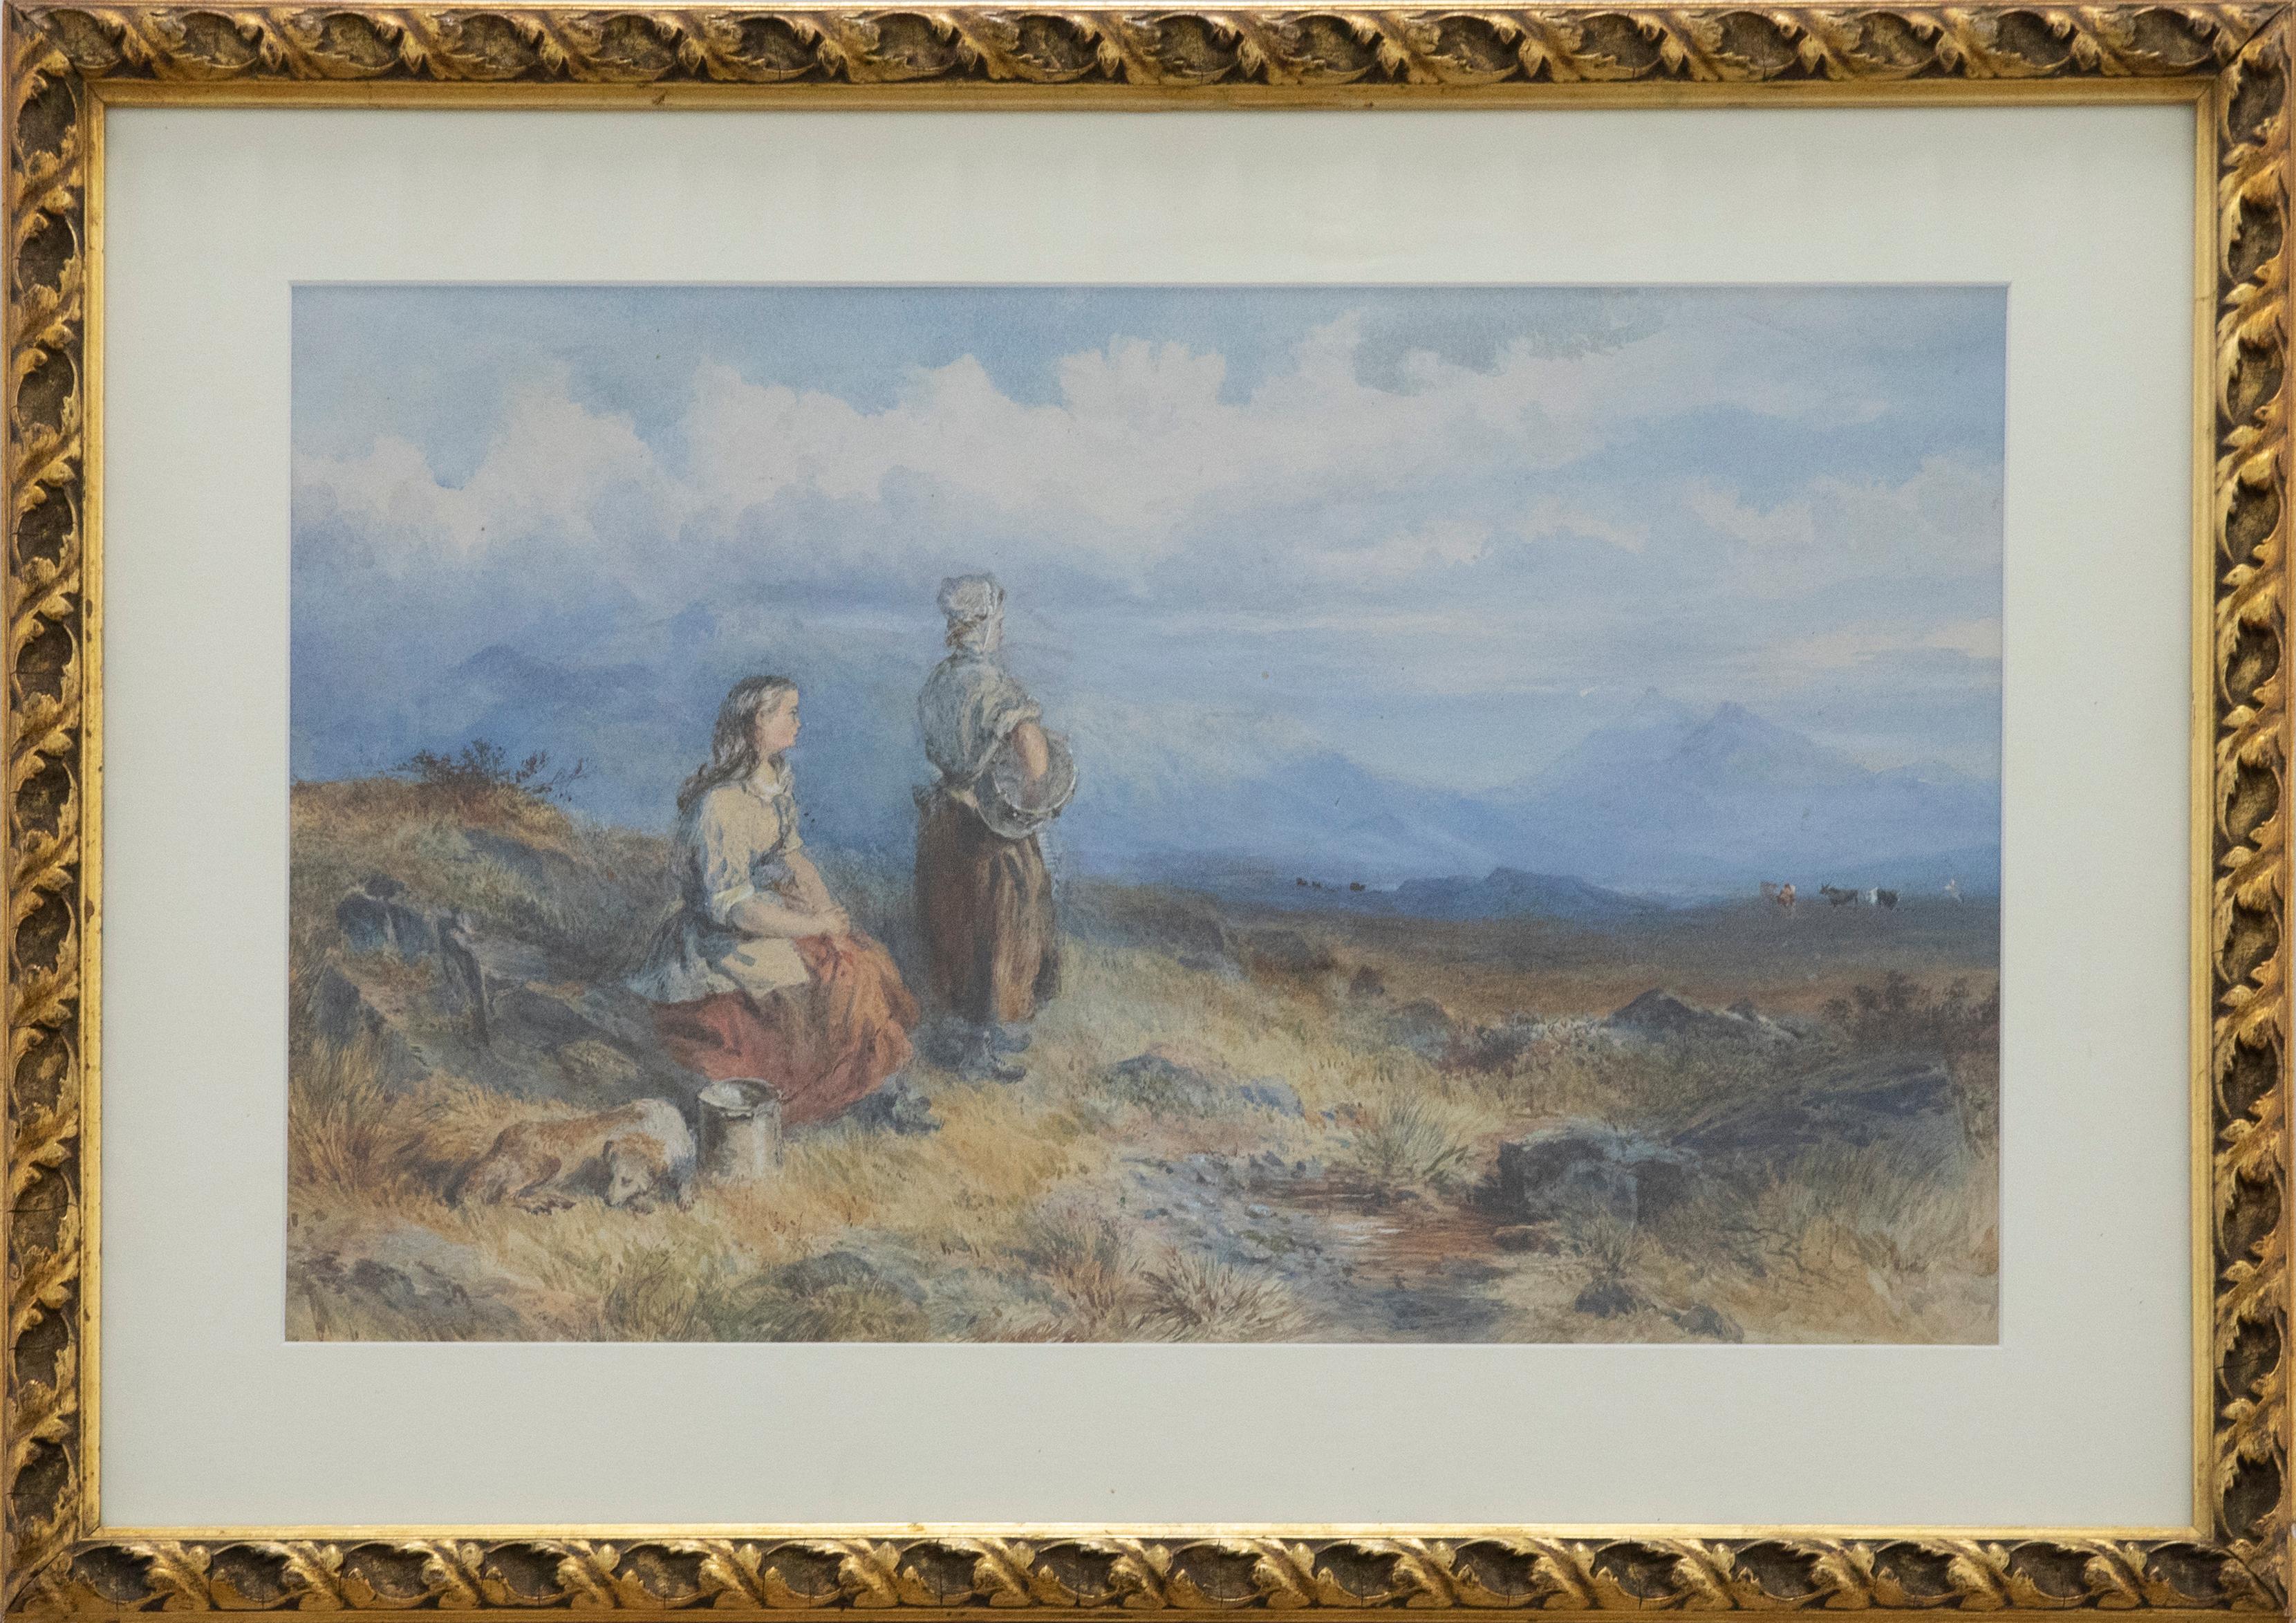 Unknown Figurative Art - Follower of Birket Foster - Framed 19th Century Watercolour, Calling the Cows